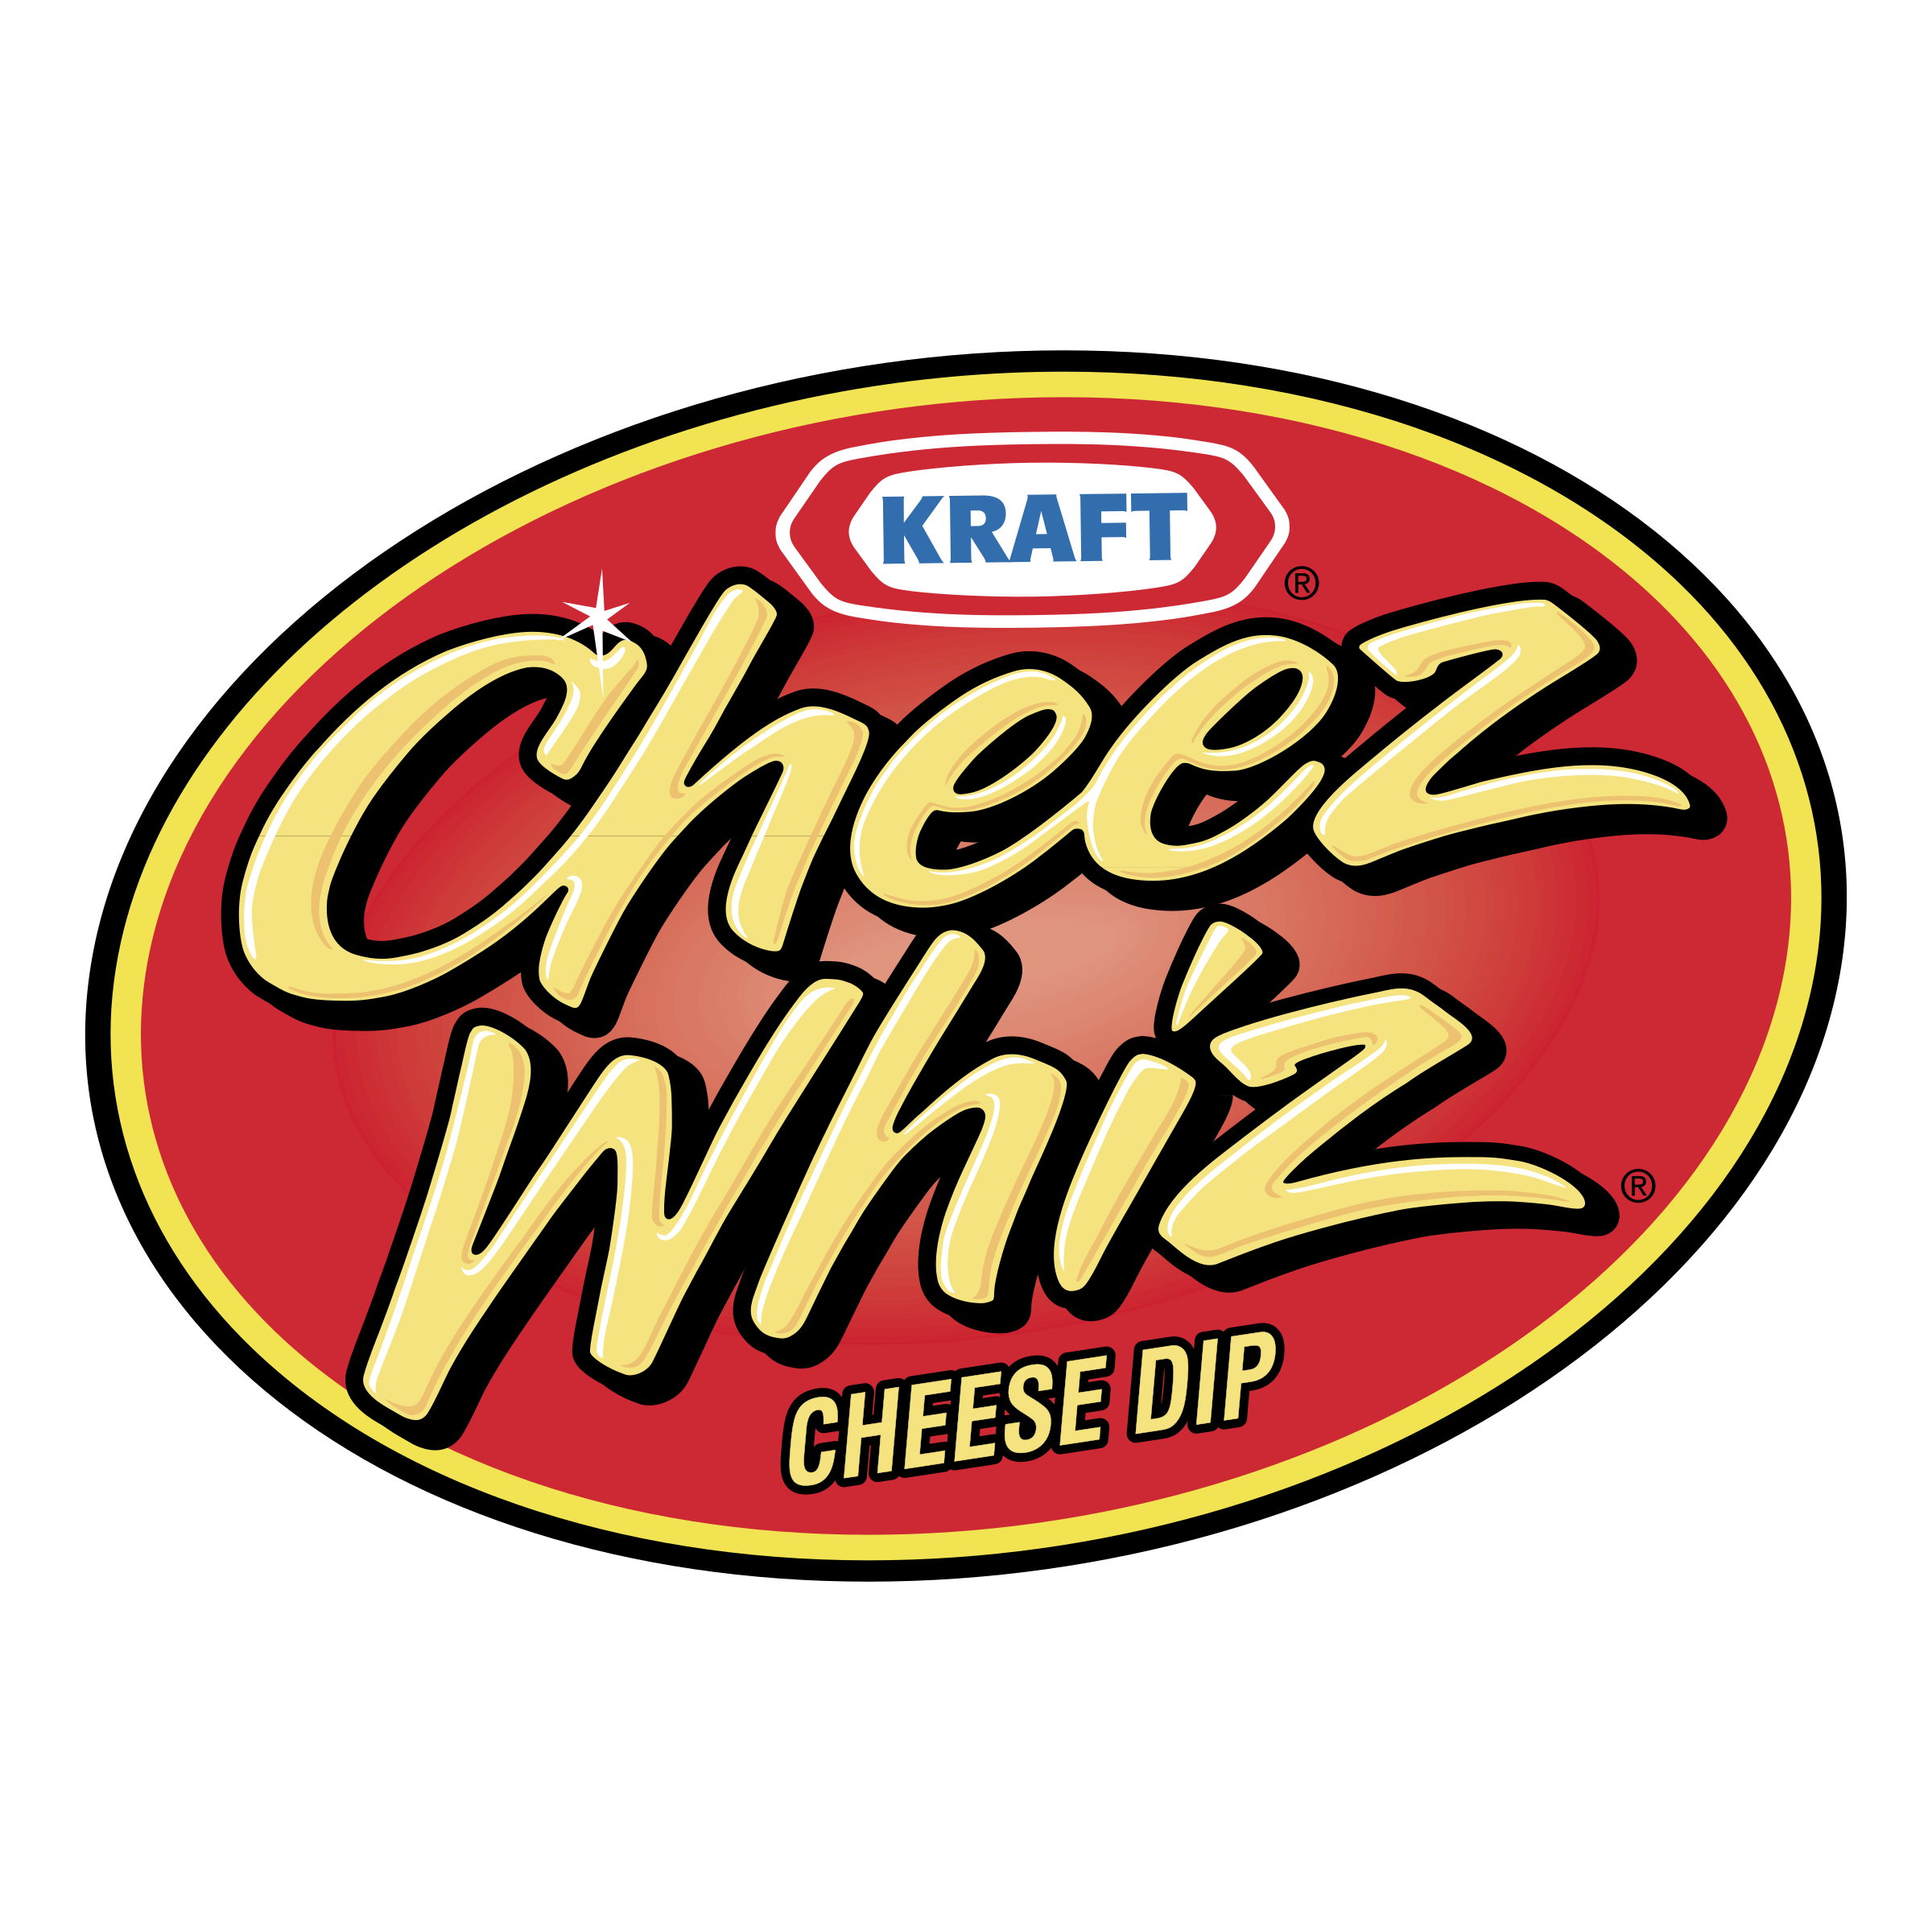 Discontinued flavours of Easy Cheese, Cheezwhiz Wiki